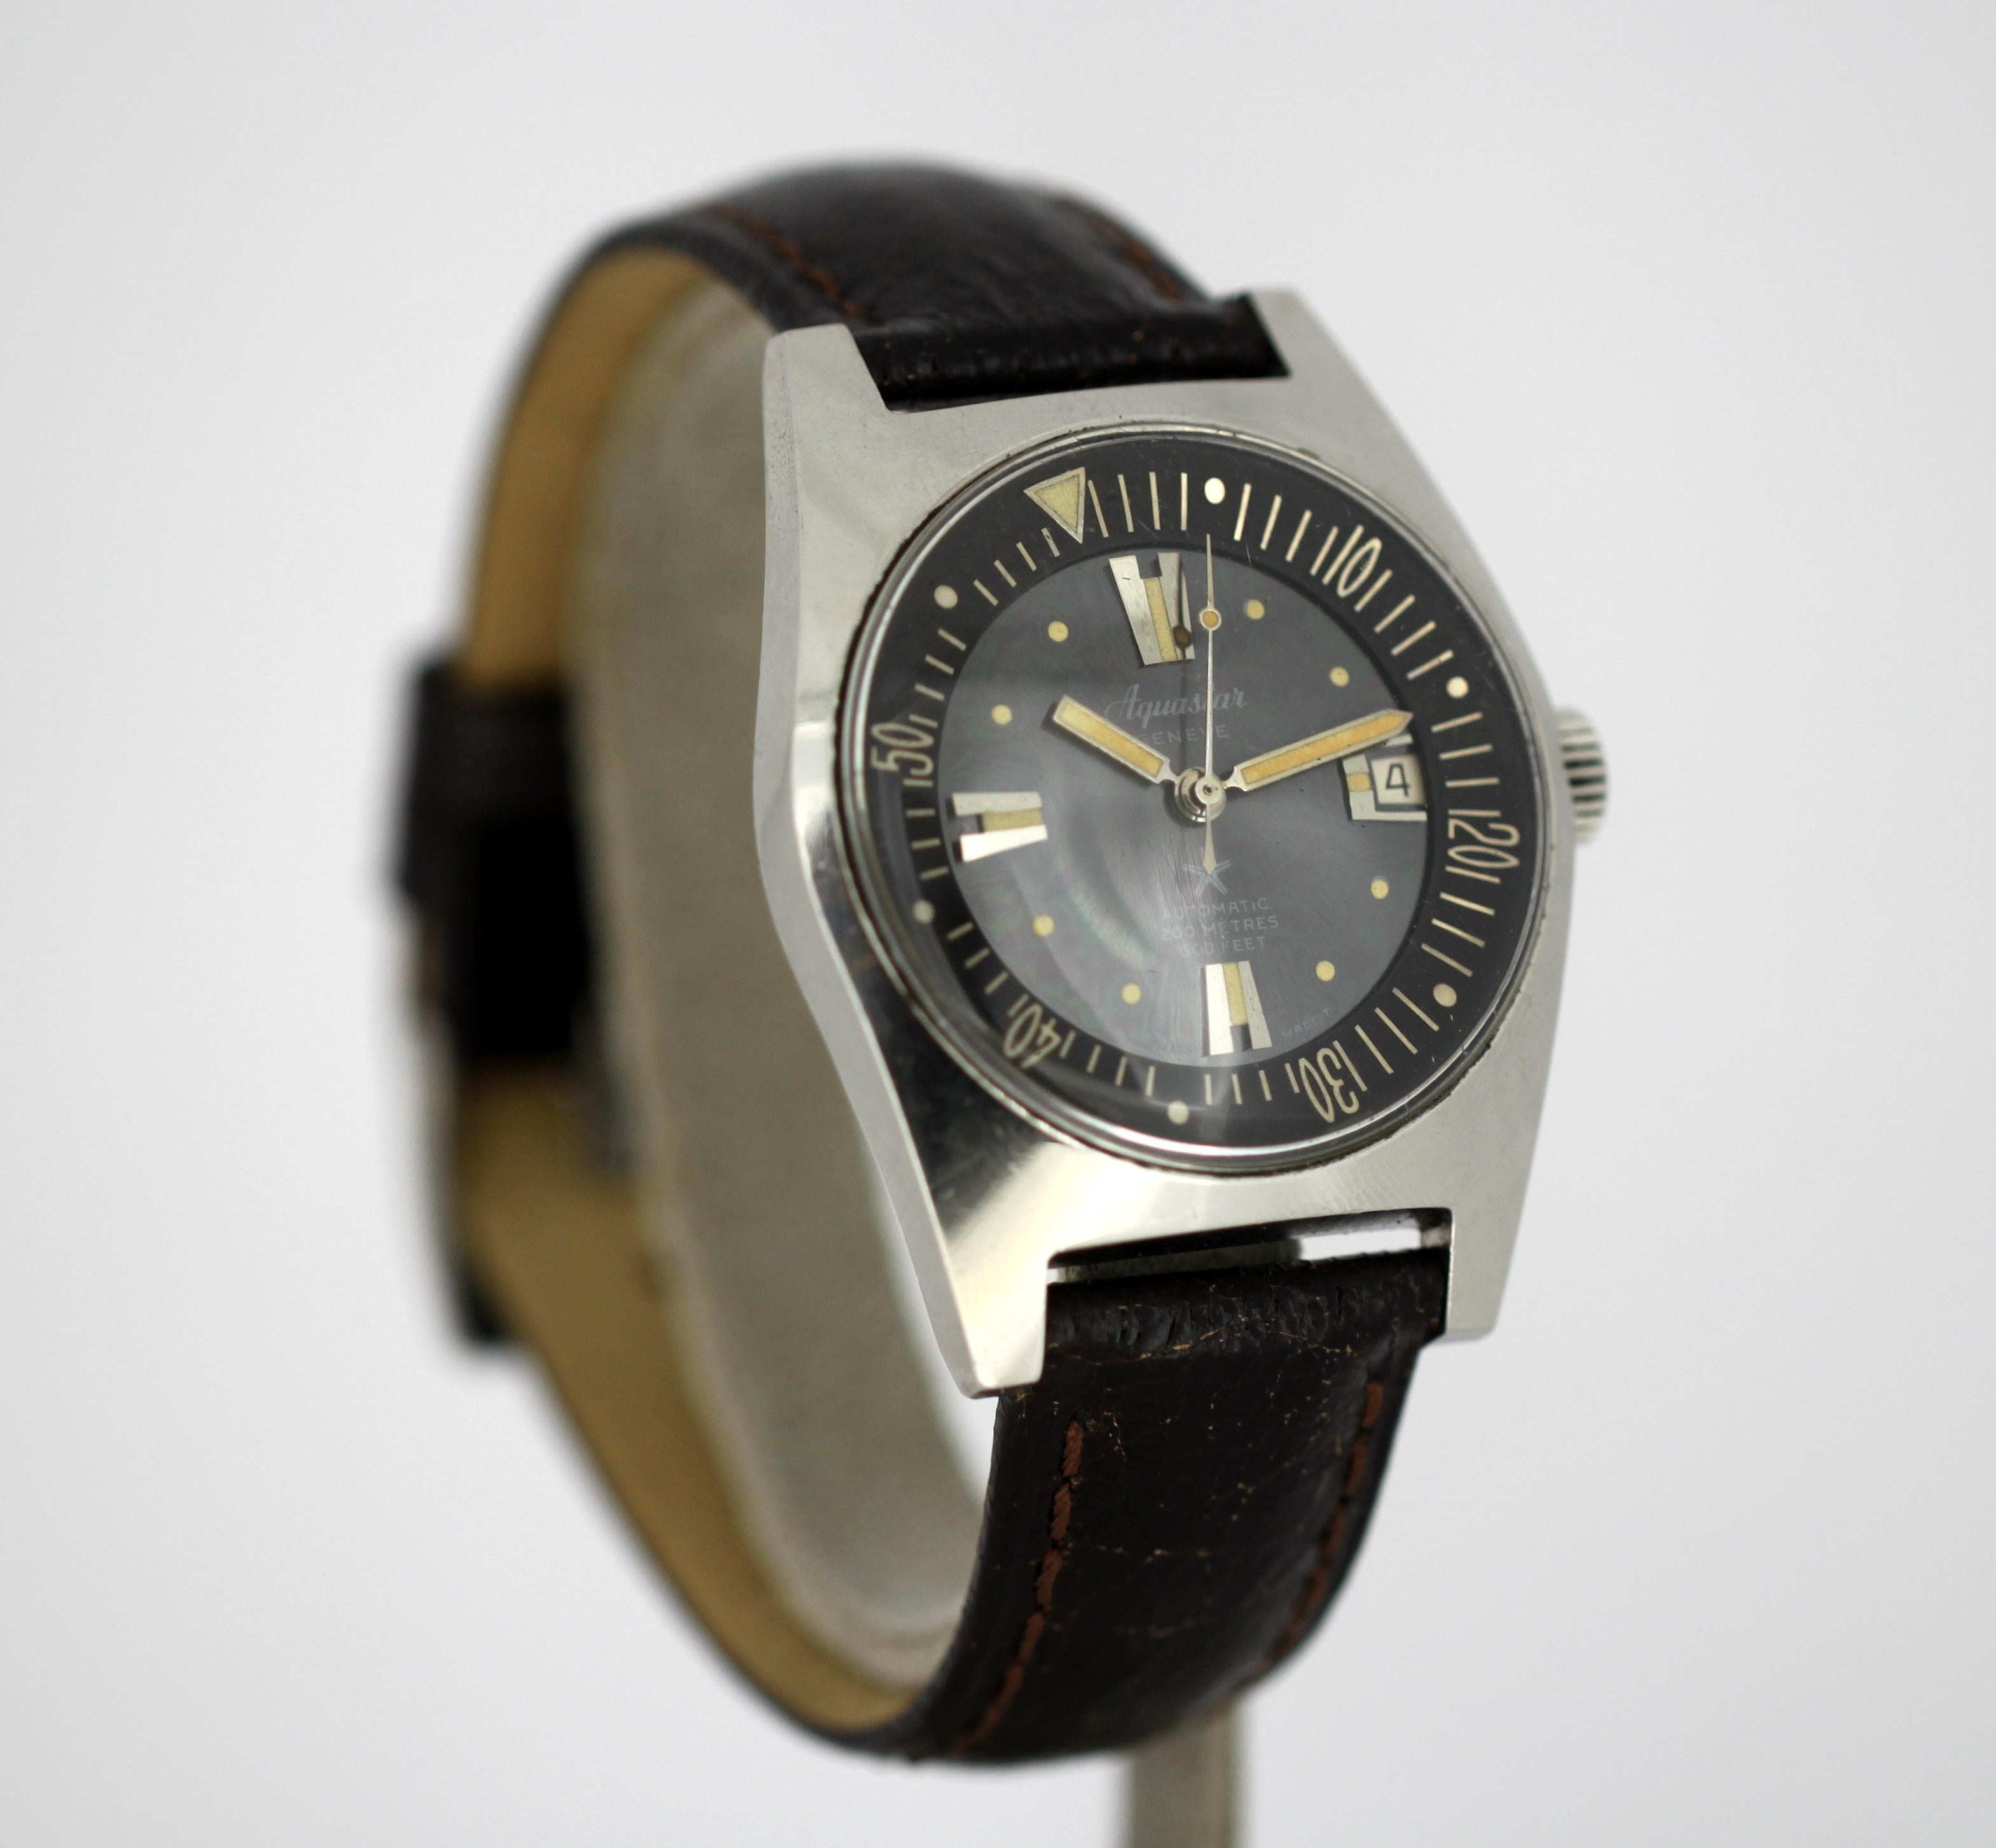 Aquastar automatic wristwatch, circa 1960s

Gender: Mens
Case Diameter : 38 mm
Movement: Automatic
Watchband Material: Leather
Case material : Steel
Display Type:	Analogue	
Dial: ( See Photos )
Hands: Black
Box / Papers : No
Clasp : Strap Buckle